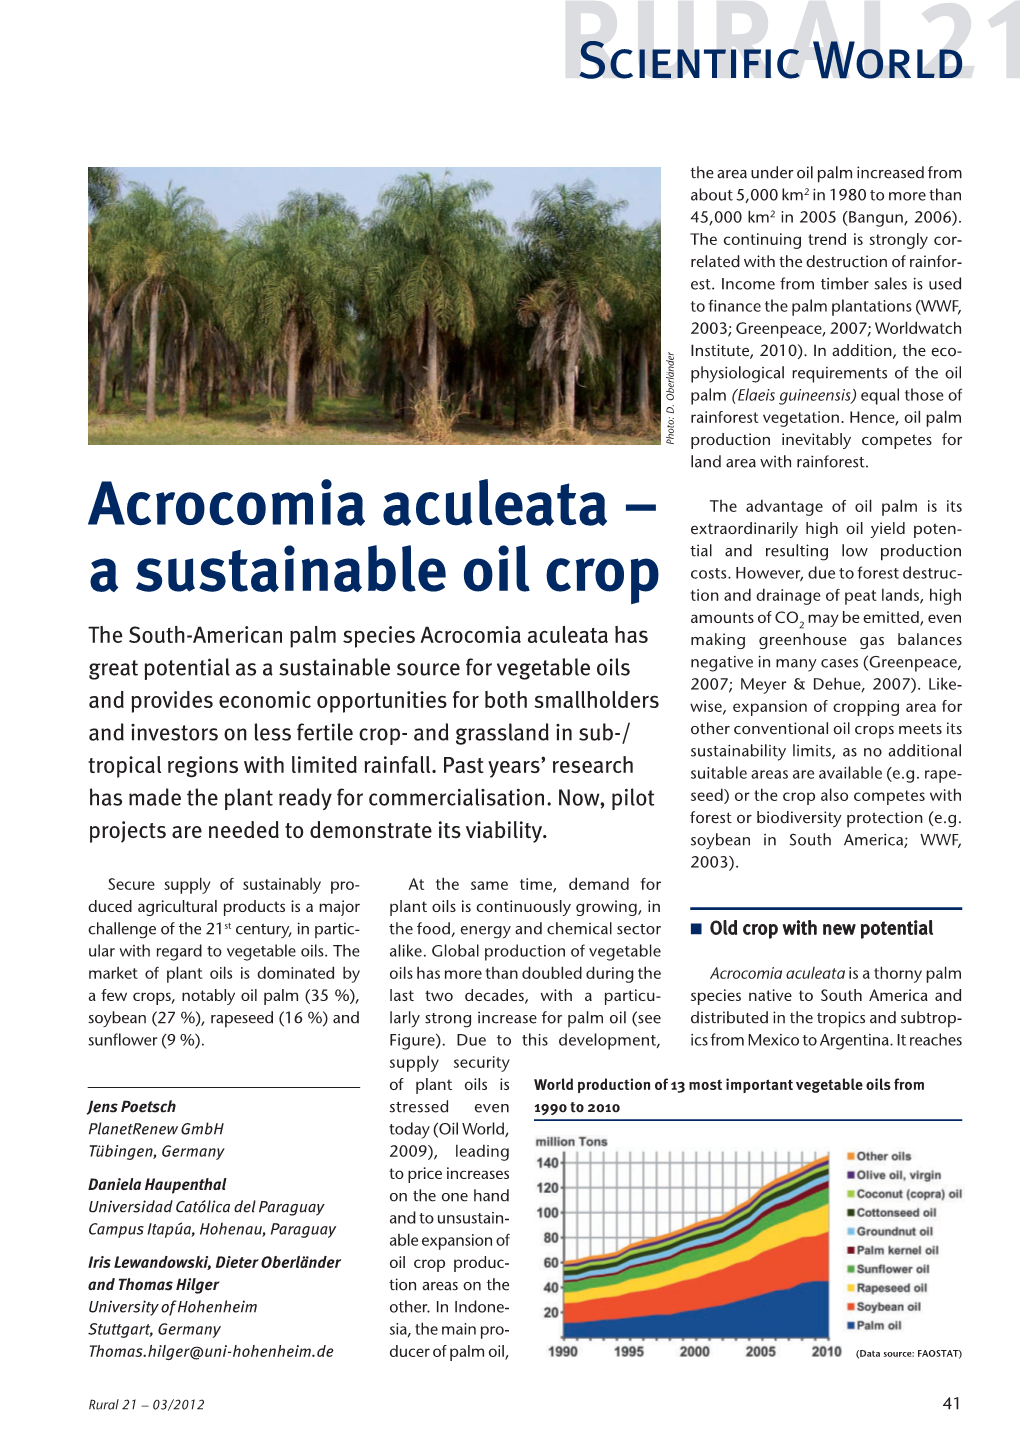 Acrocomia Aculeata – Extraordinarily High Oil Yield Poten- Tial and Resulting Low Production Costs